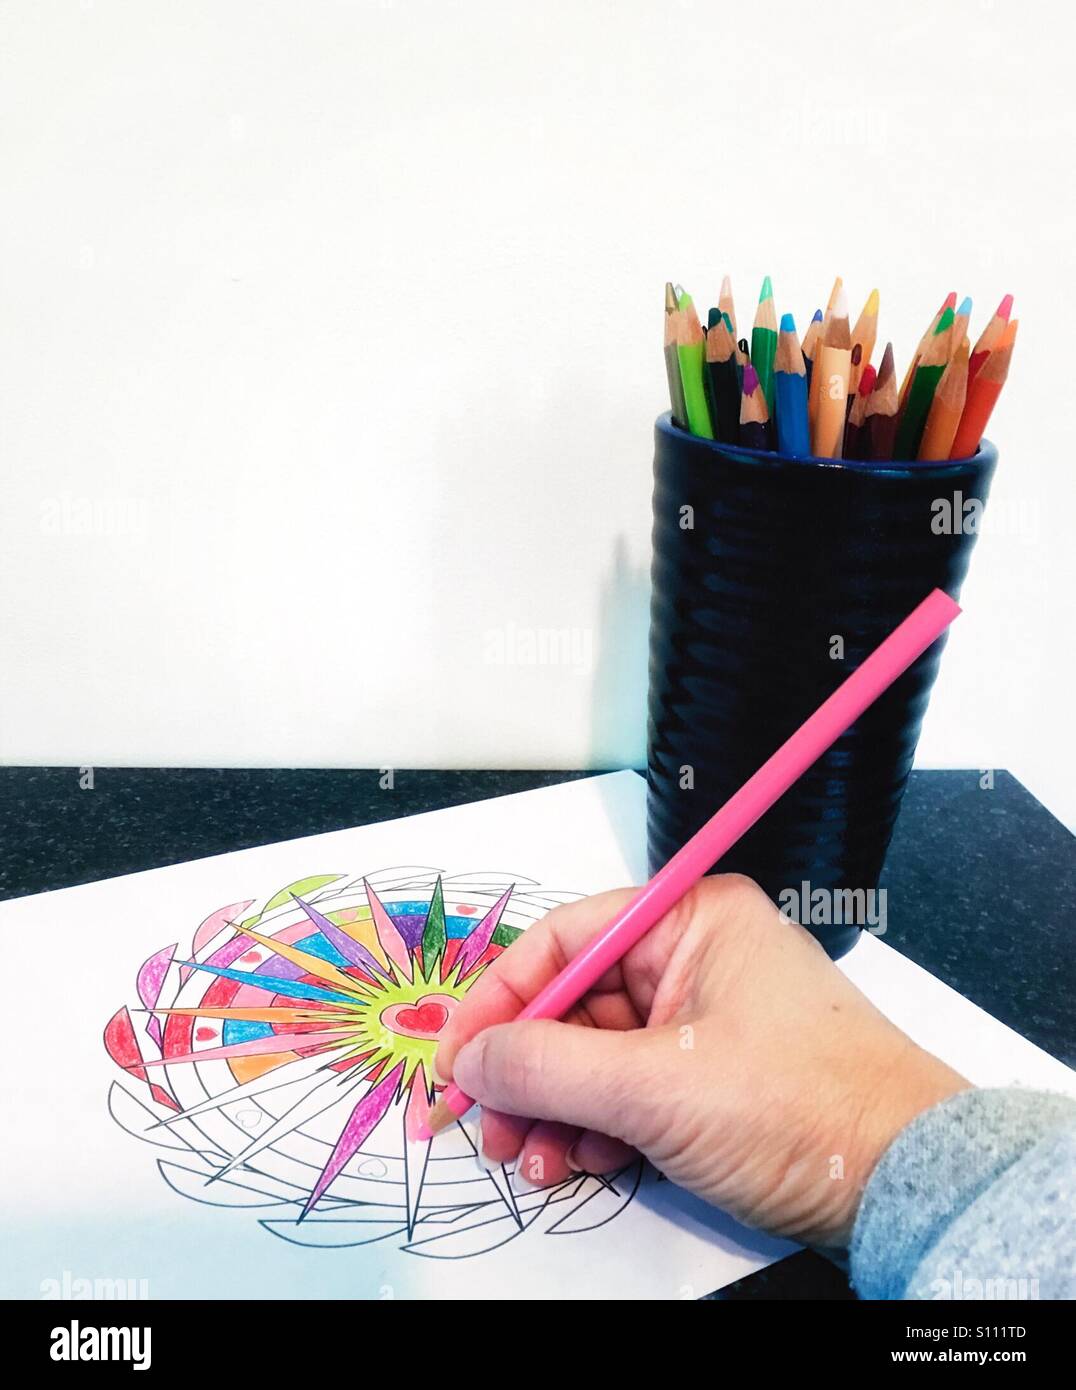 Adult coloring is a recent trend. Concept photo part of a series with copy space. Original design model release Stock Photo